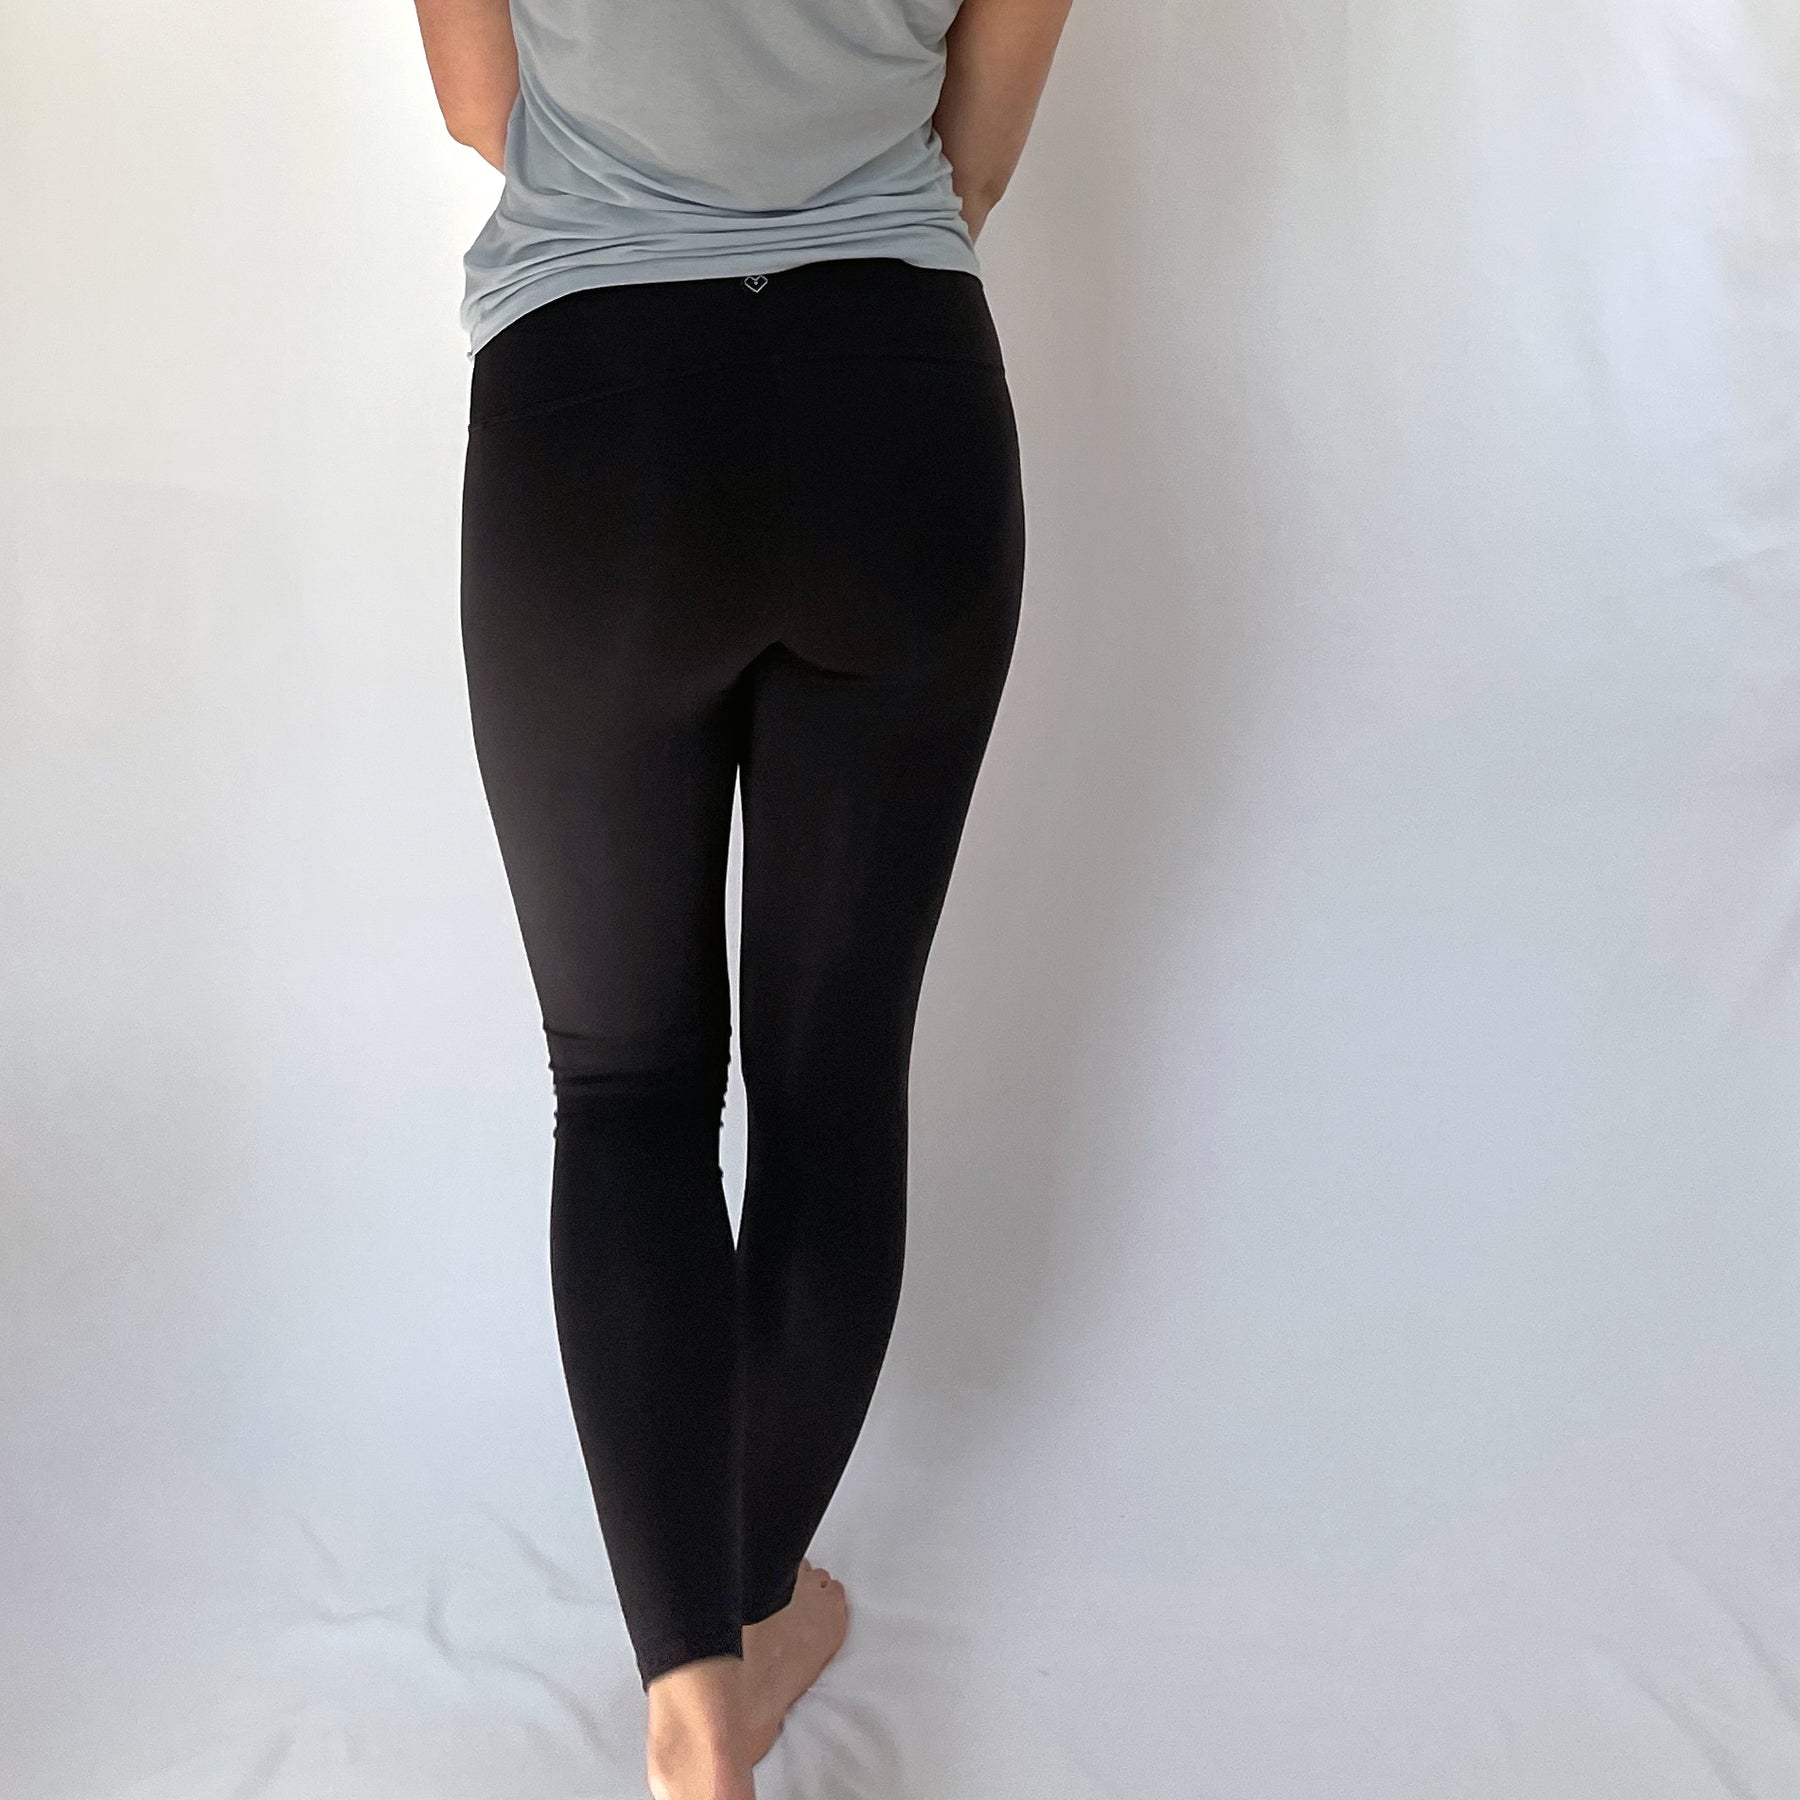 Smooth Duo Legging with Built-In Underwear 21 – Meira Active